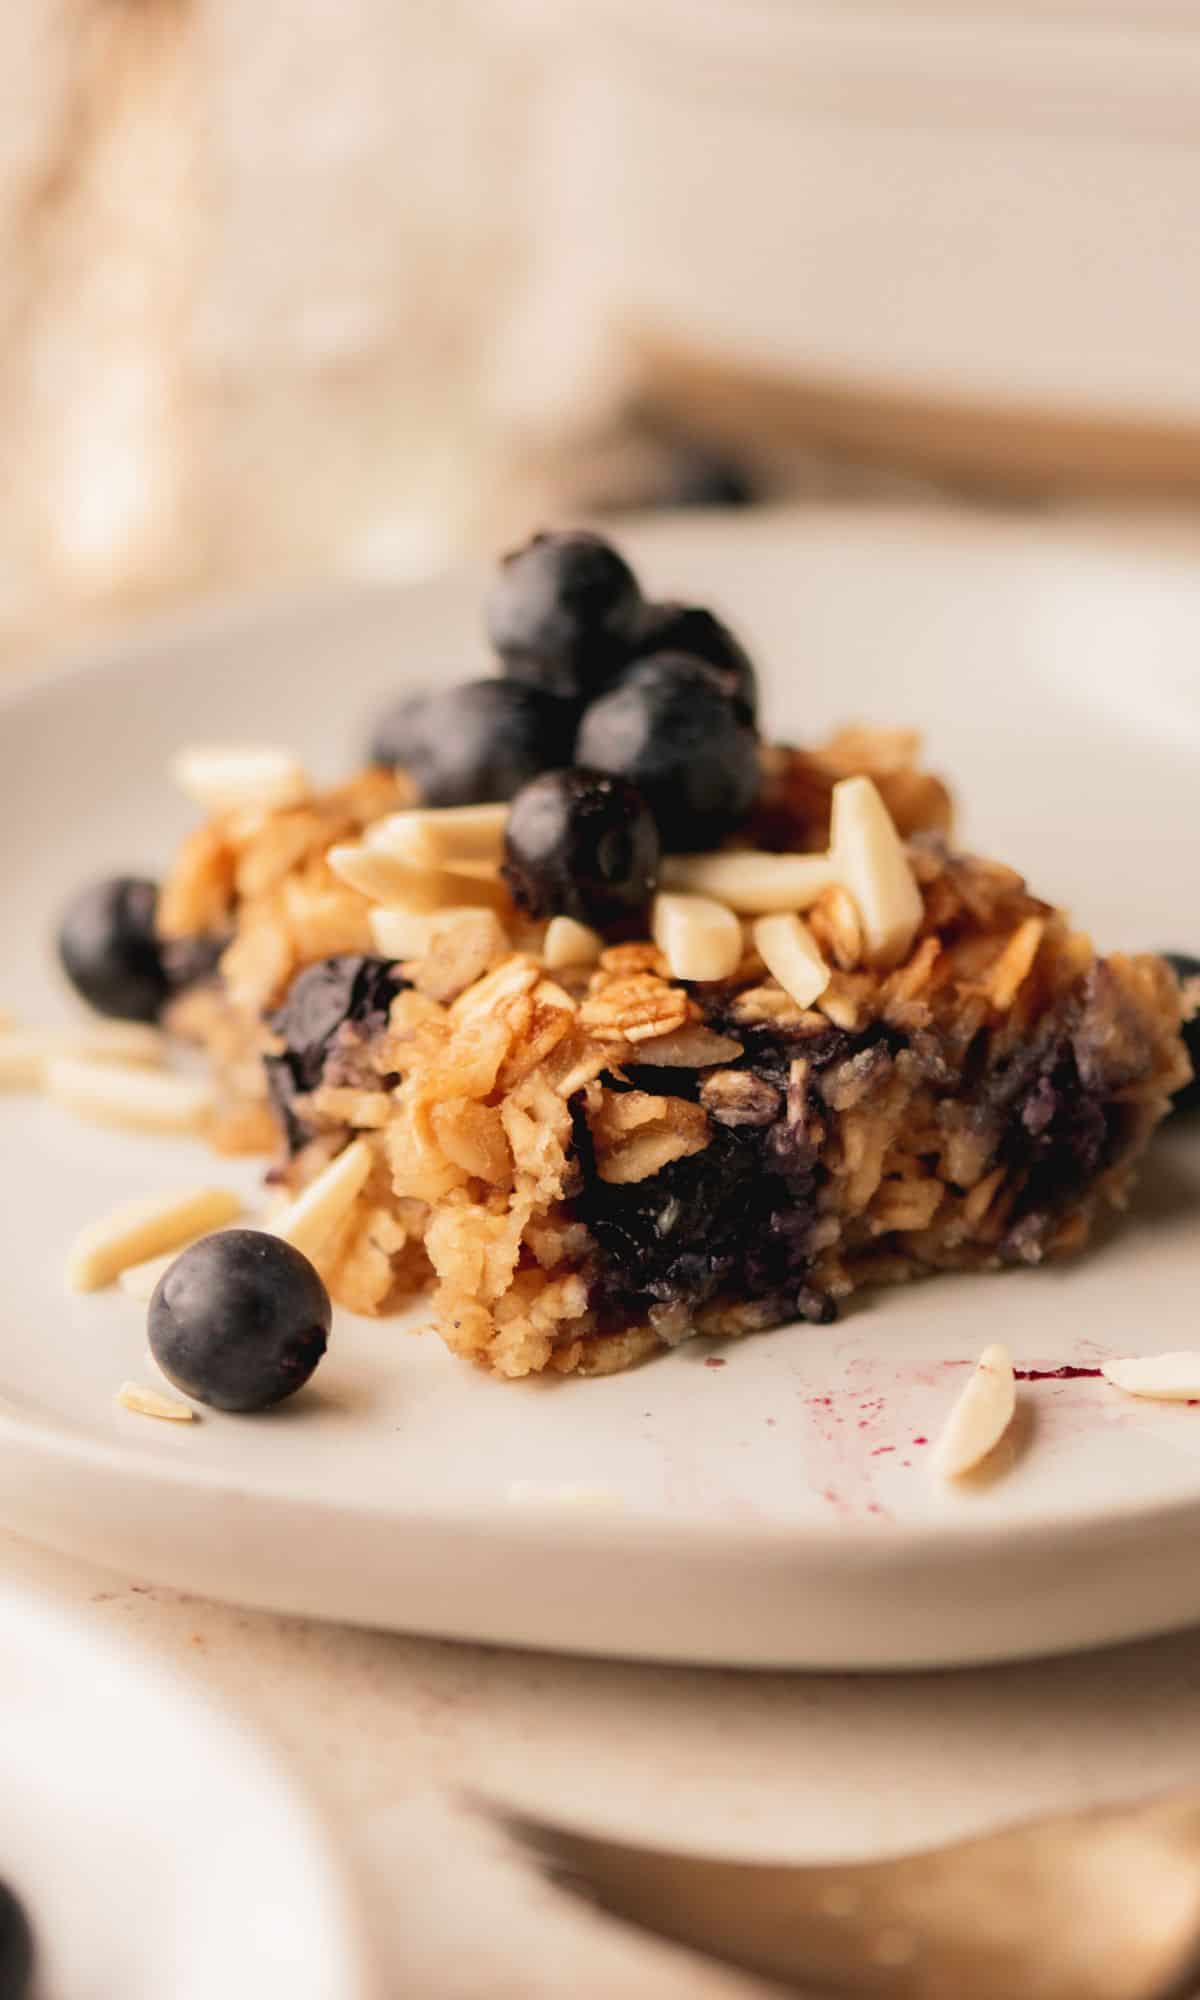 A slice of baked oatmeal on a white plate topped with blueberries and almonds.